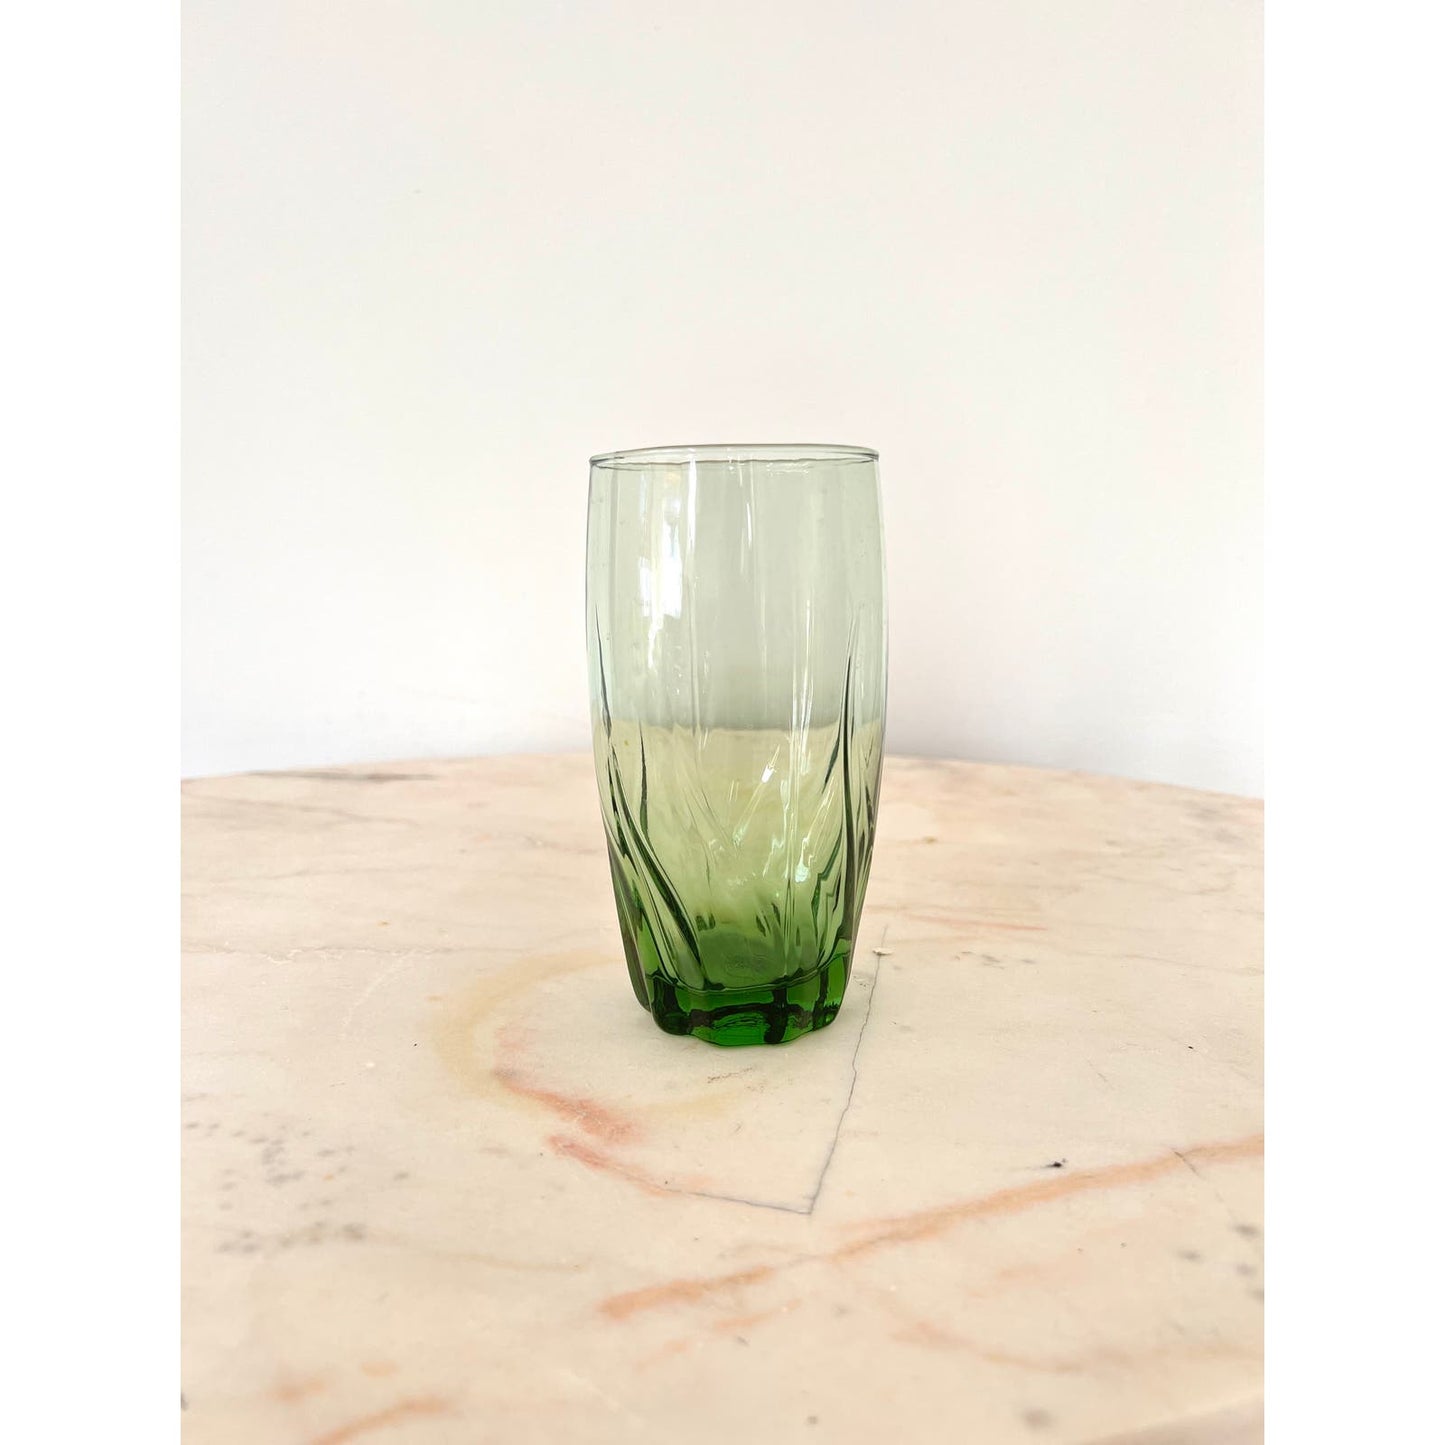 Retro Vintage Anchor Hocking Central Park Ivy Swirl Glasses Set of 12oz Tall Water Glasses in Green